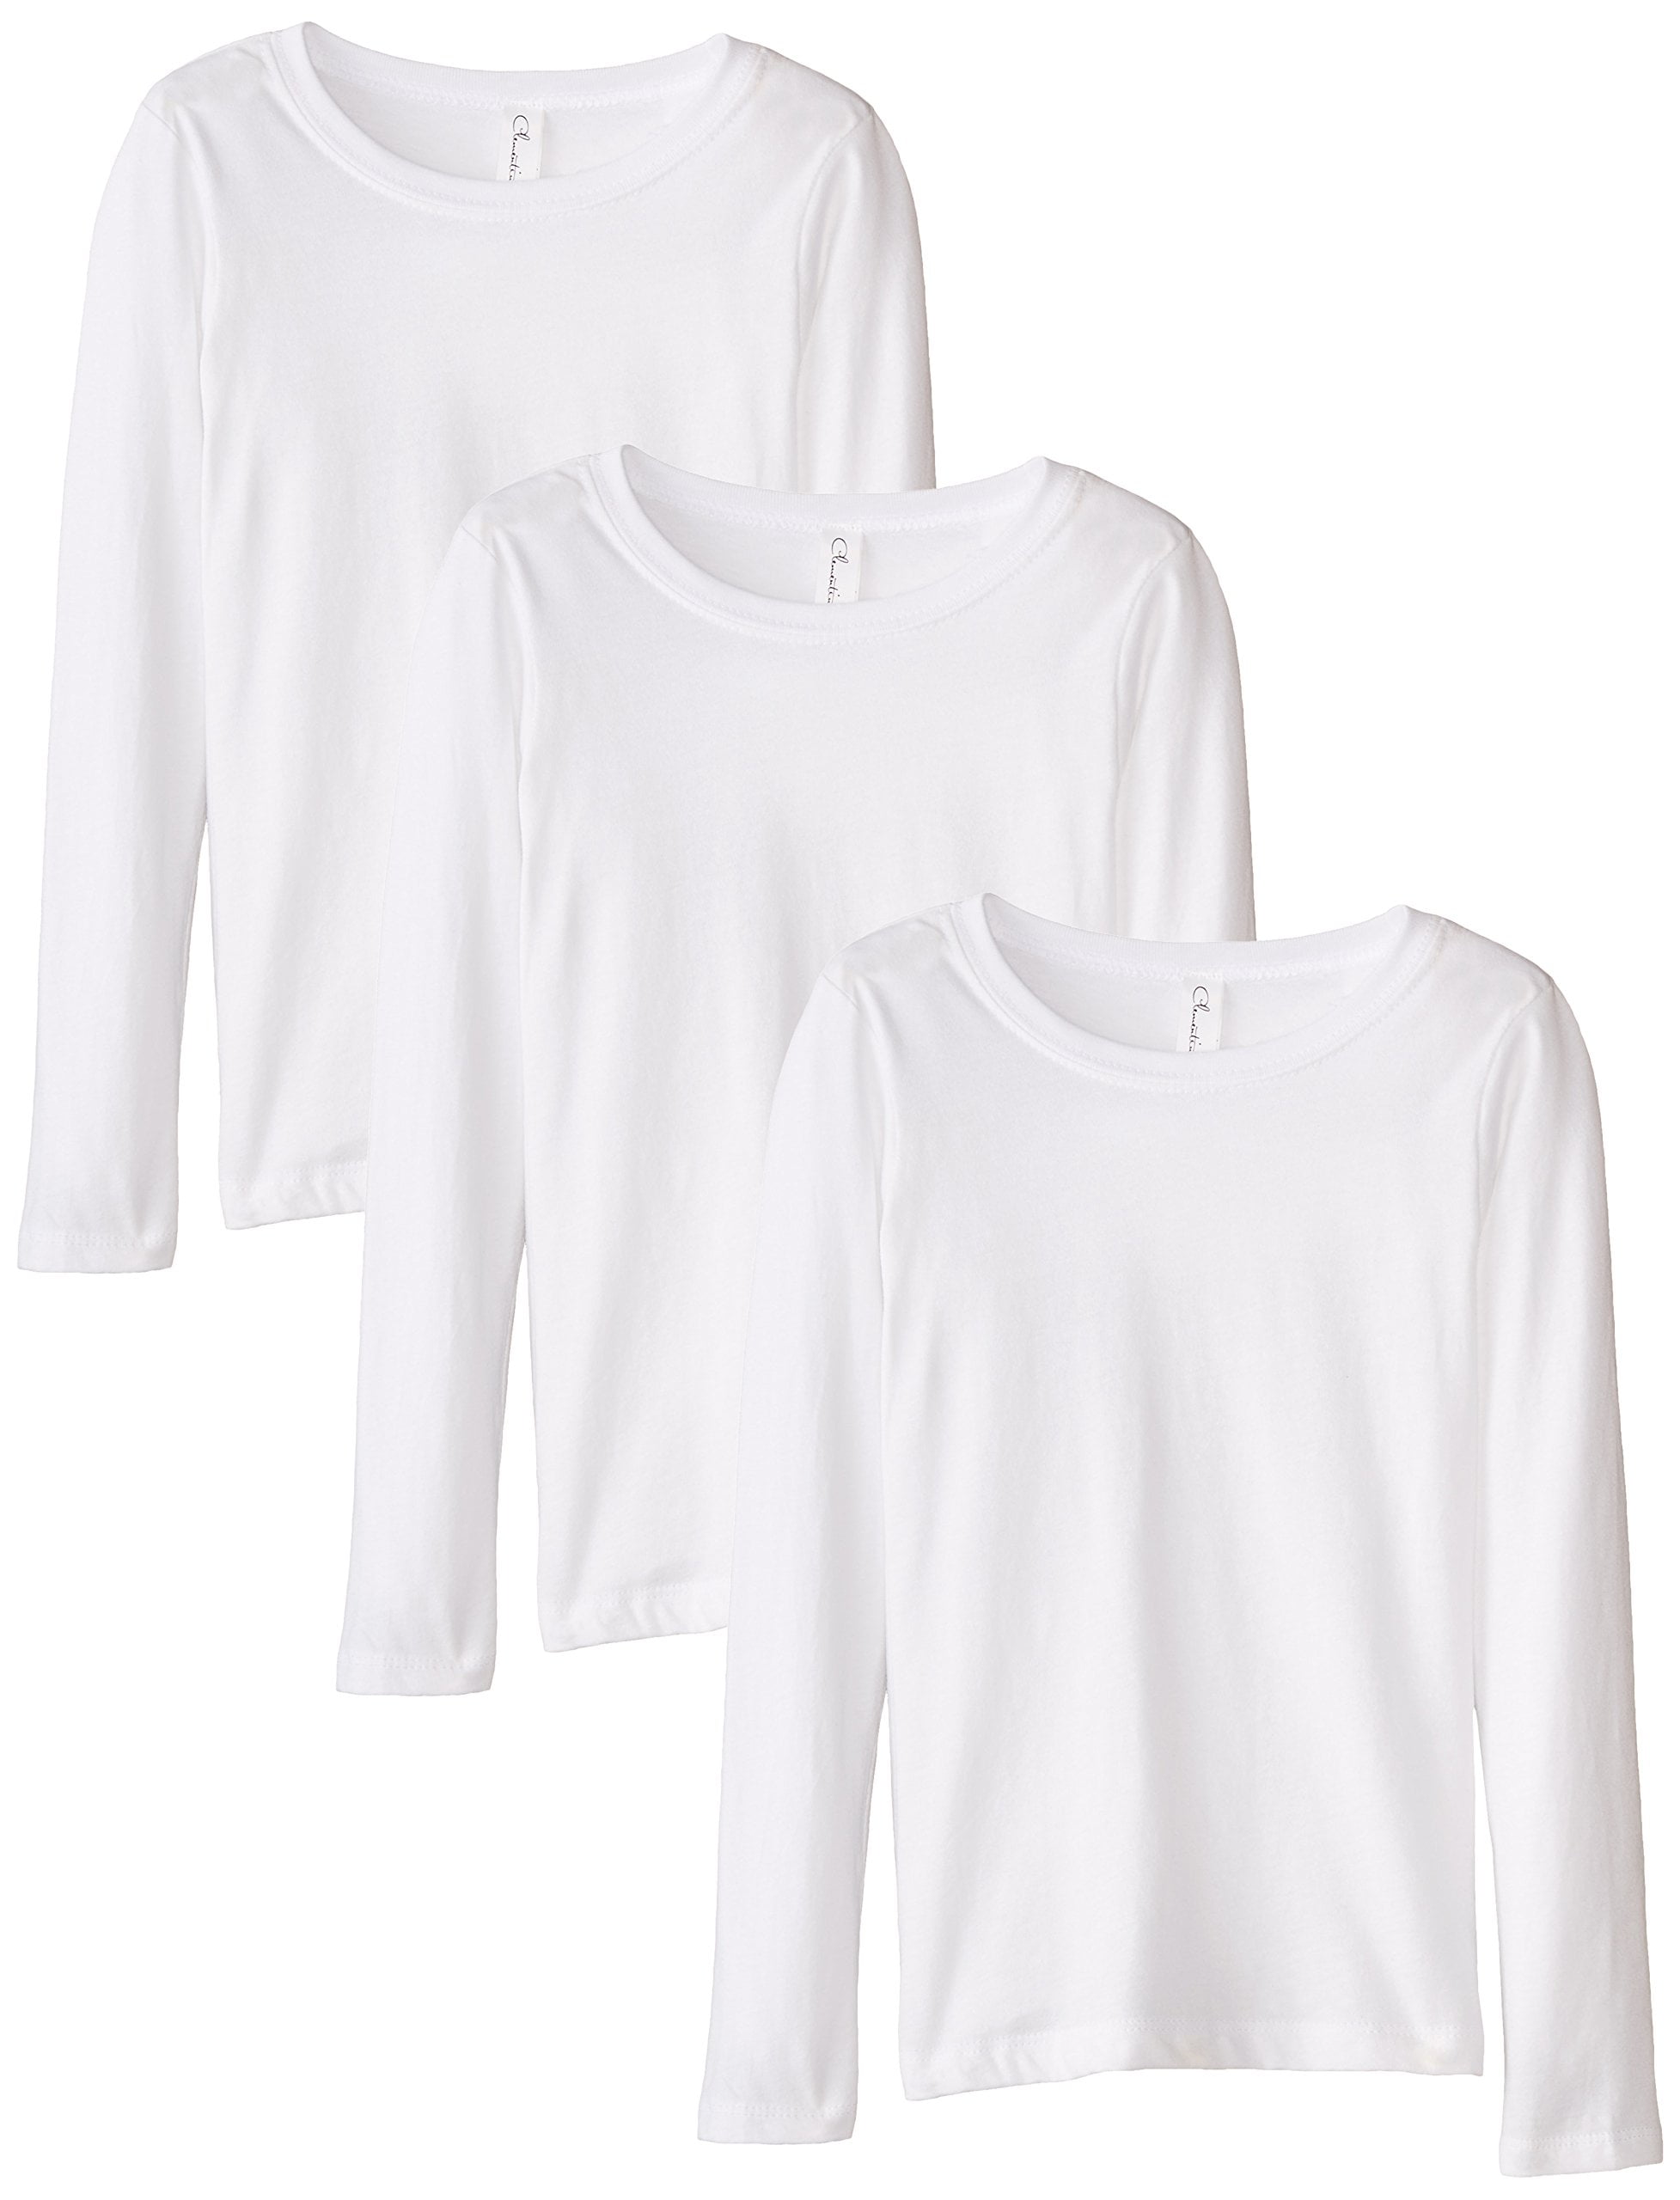 Girls' Pack of 4 Long-Sleeved T-Shirts - white